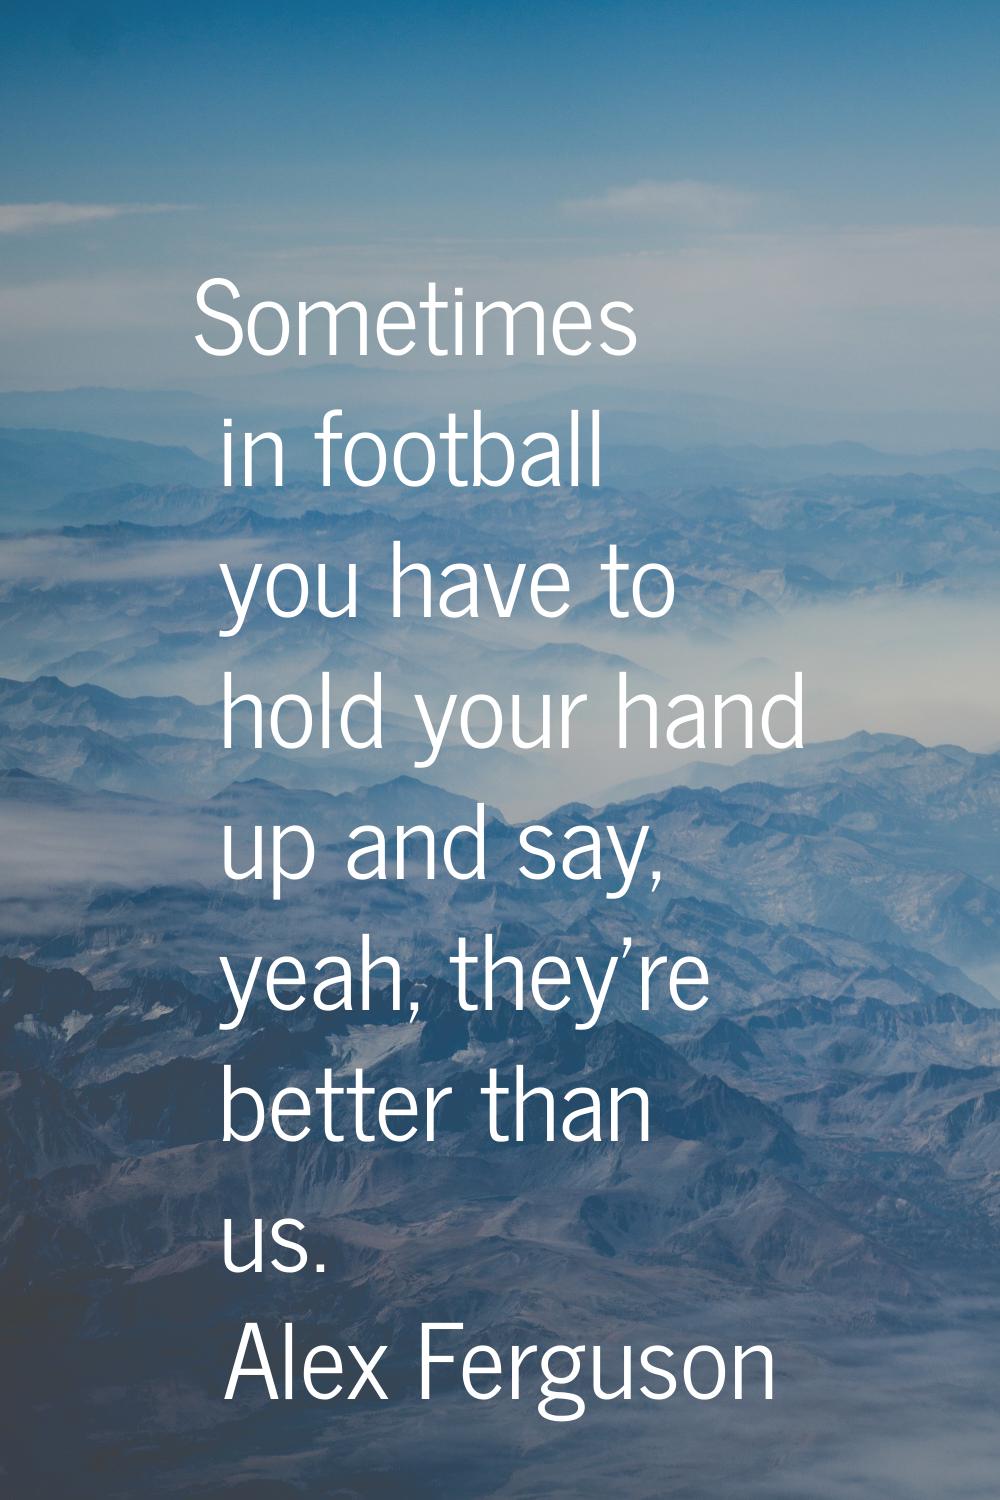 Sometimes in football you have to hold your hand up and say, yeah, they're better than us.